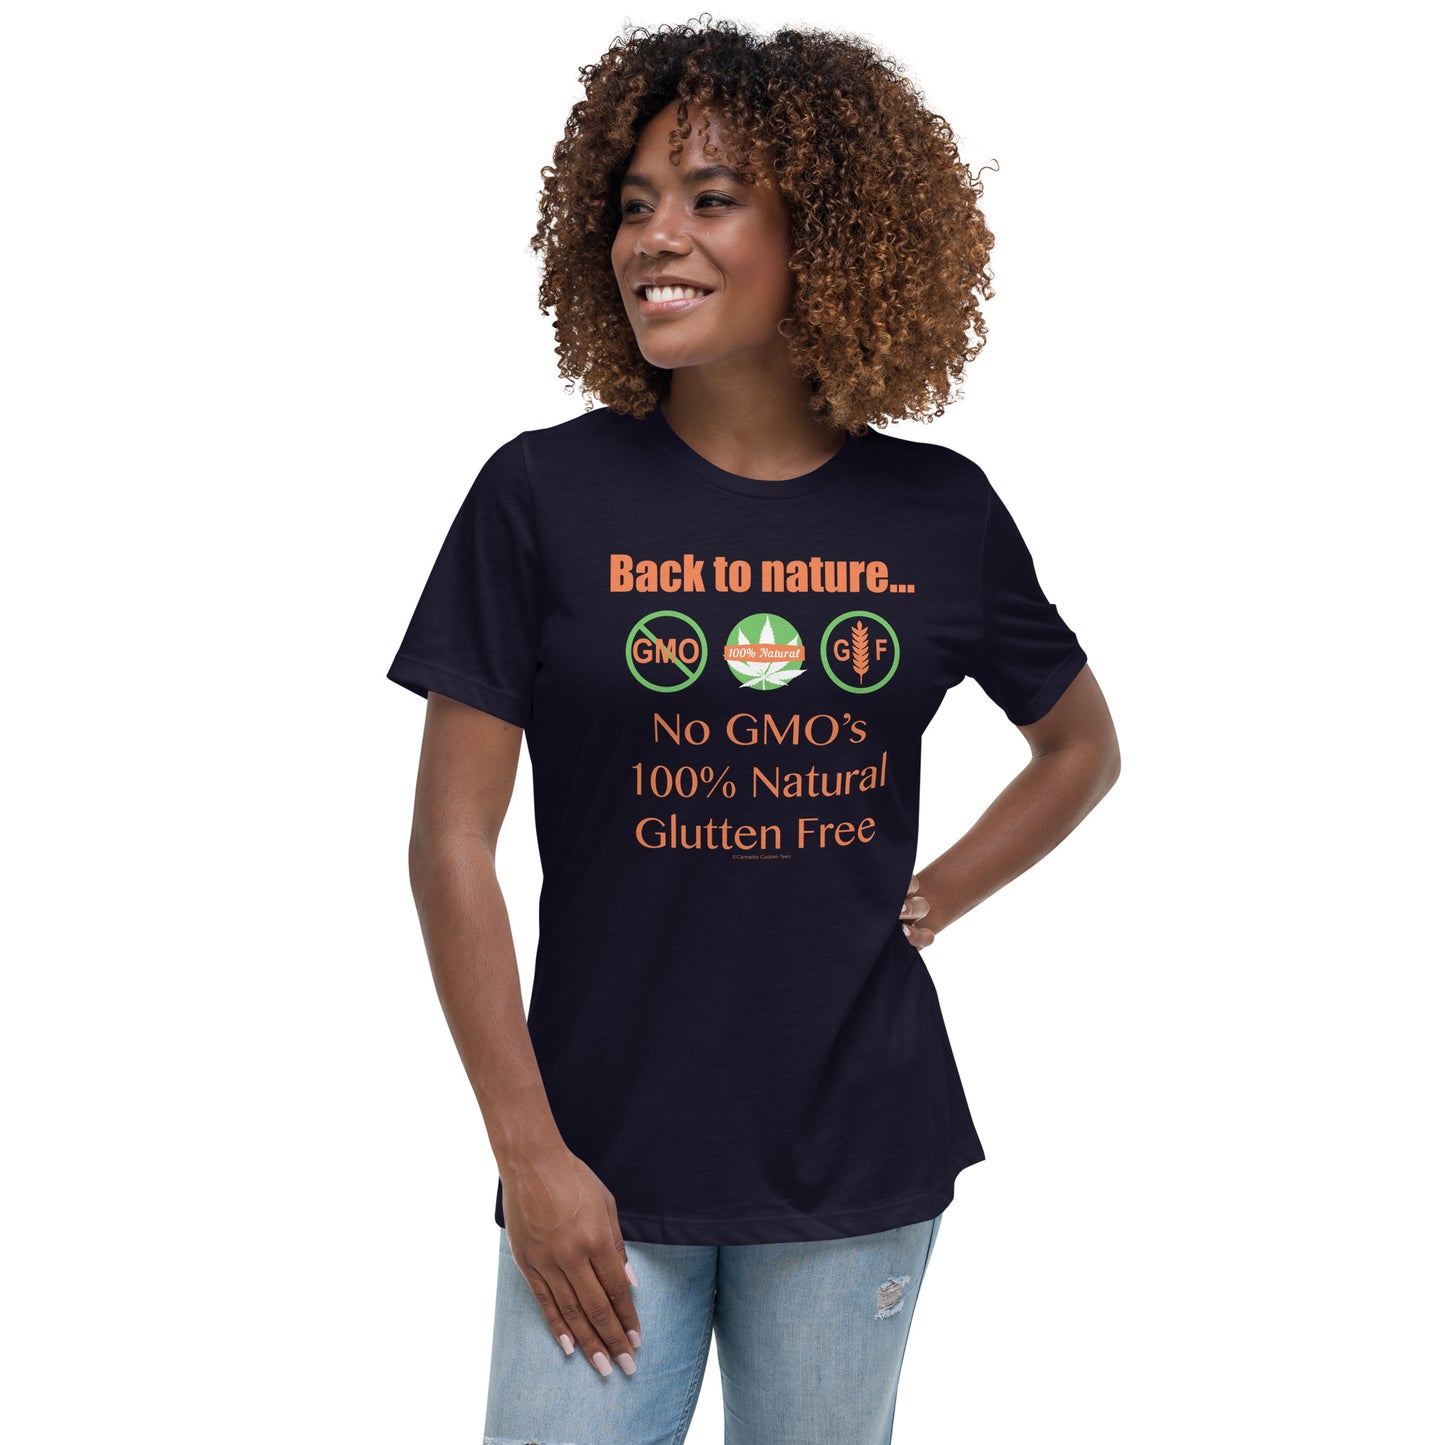 Back to Nature Women's Relaxed T-Shirt